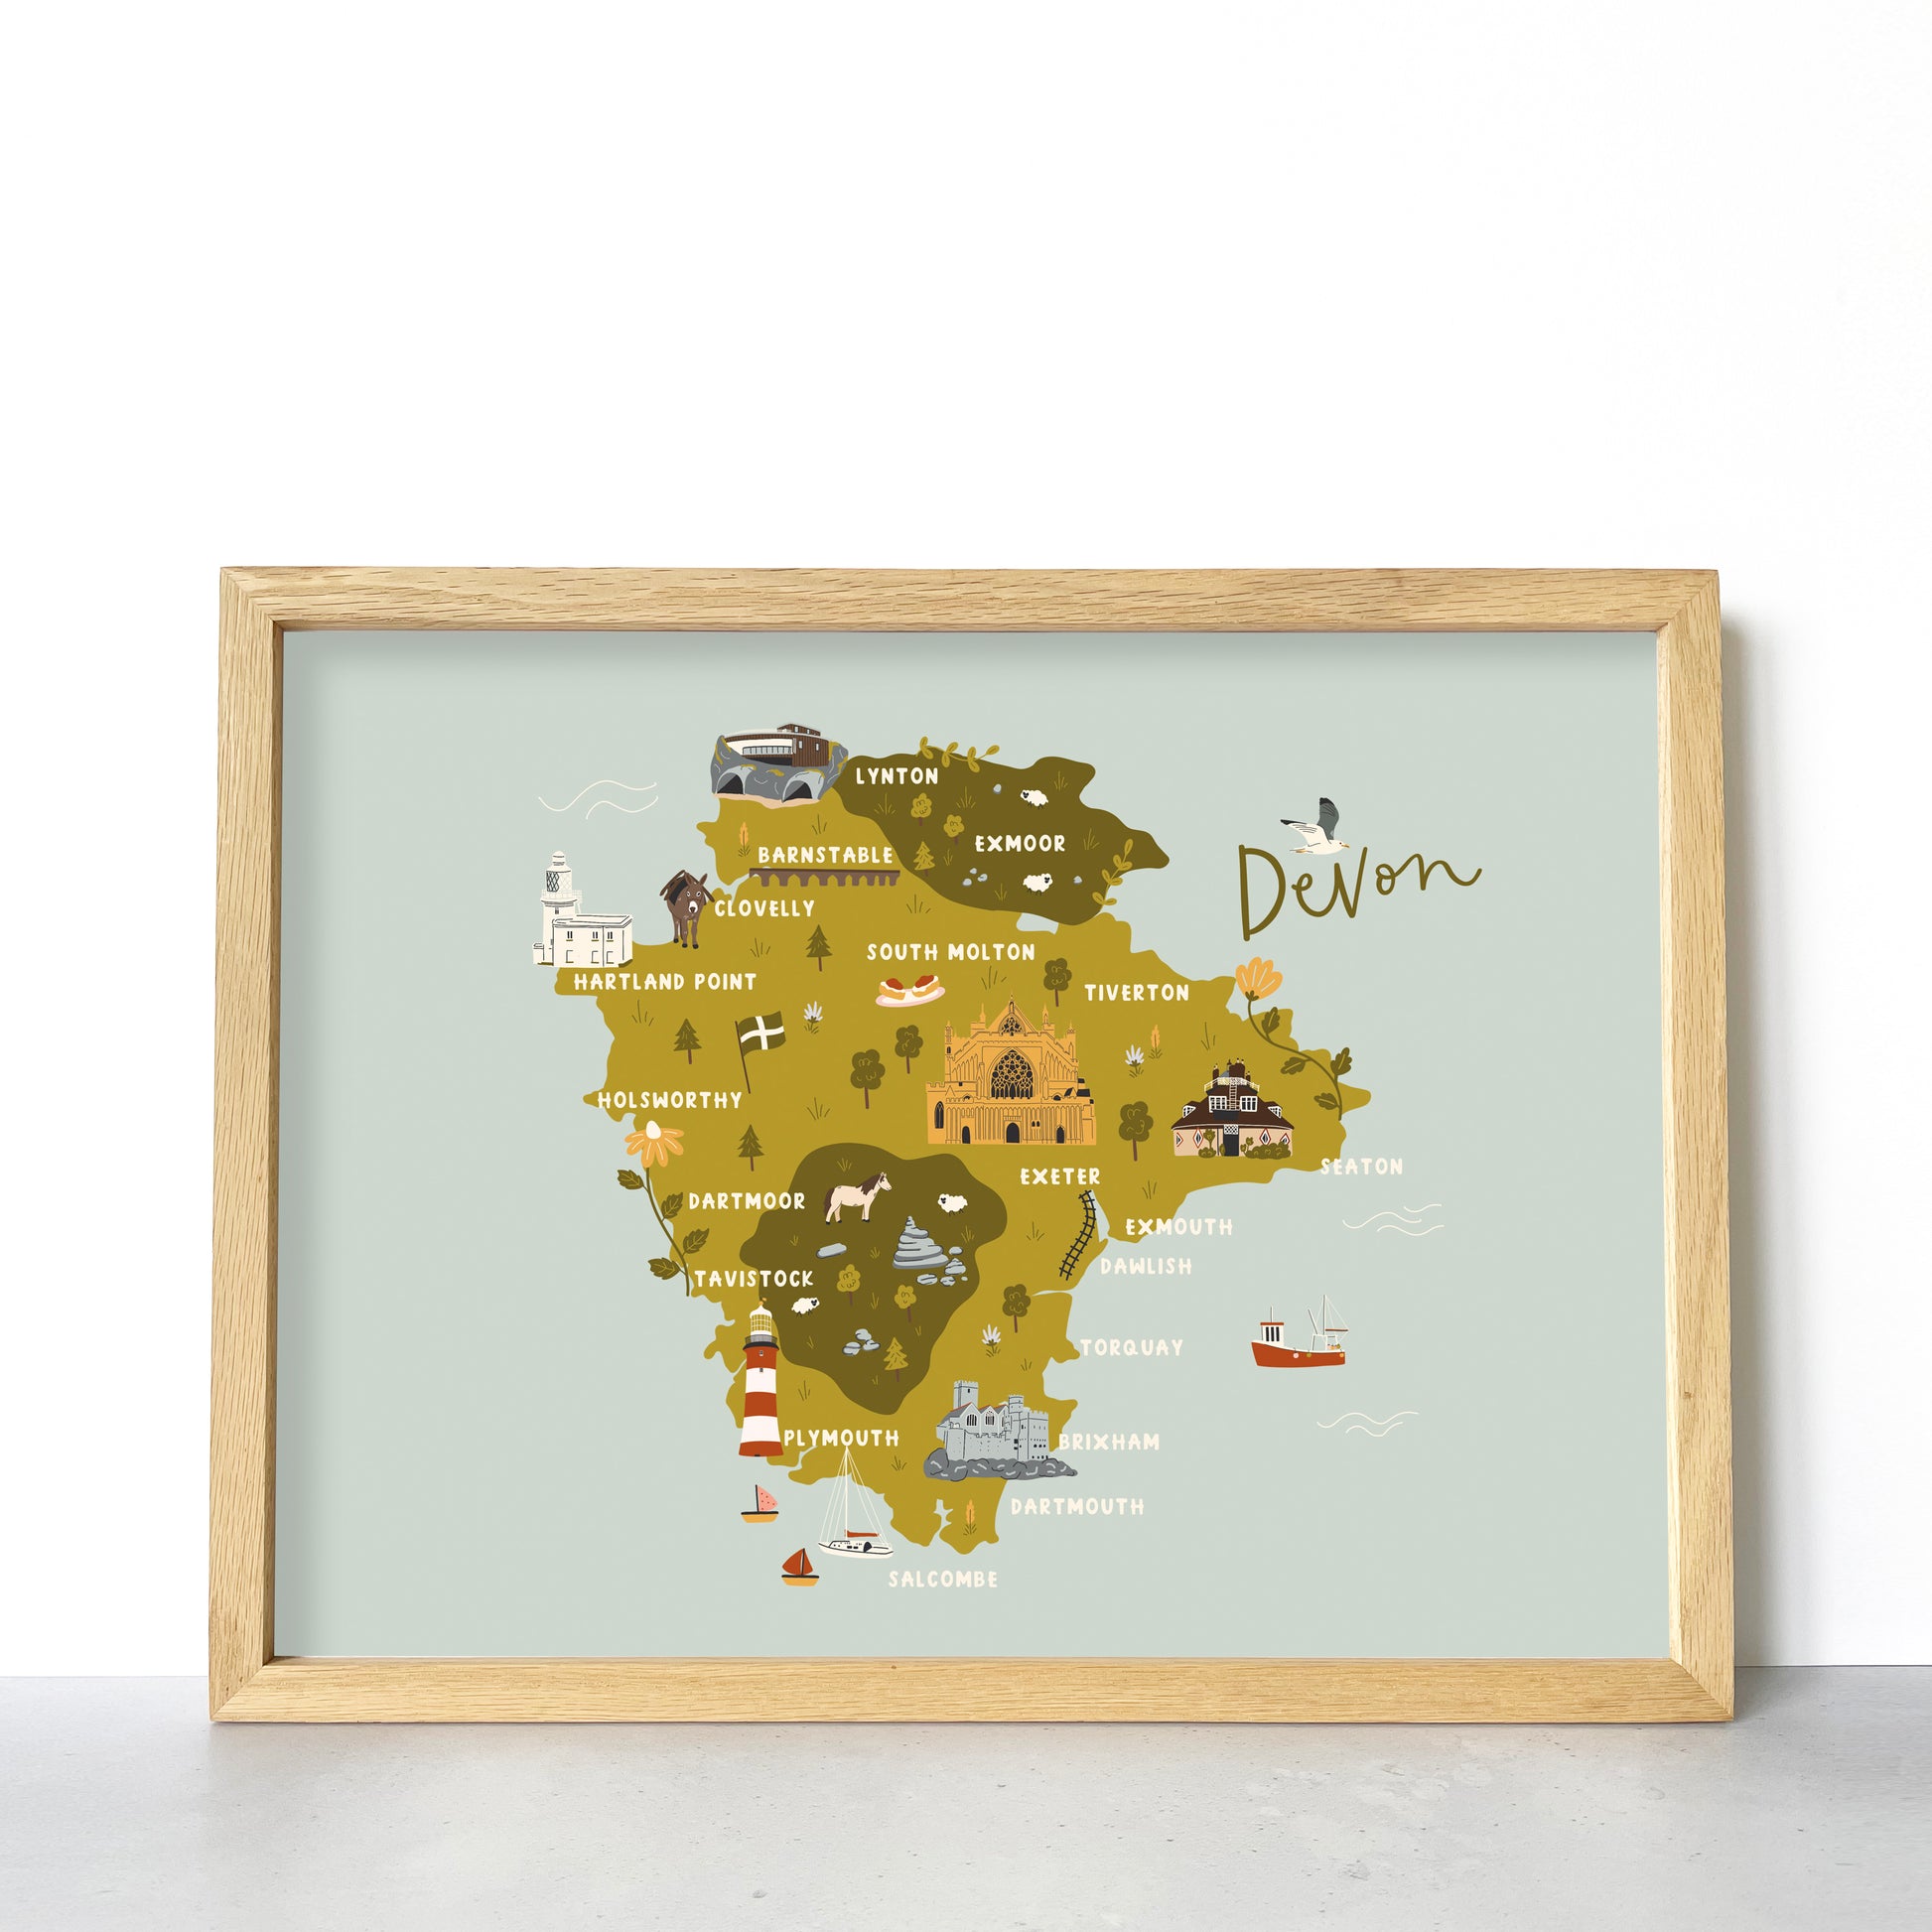 Illustrated map of Devon, featuring Plymouth, Dartmoor, Salcombe, Exeter, Exmoor and Clovelly, by Abbie Imagine